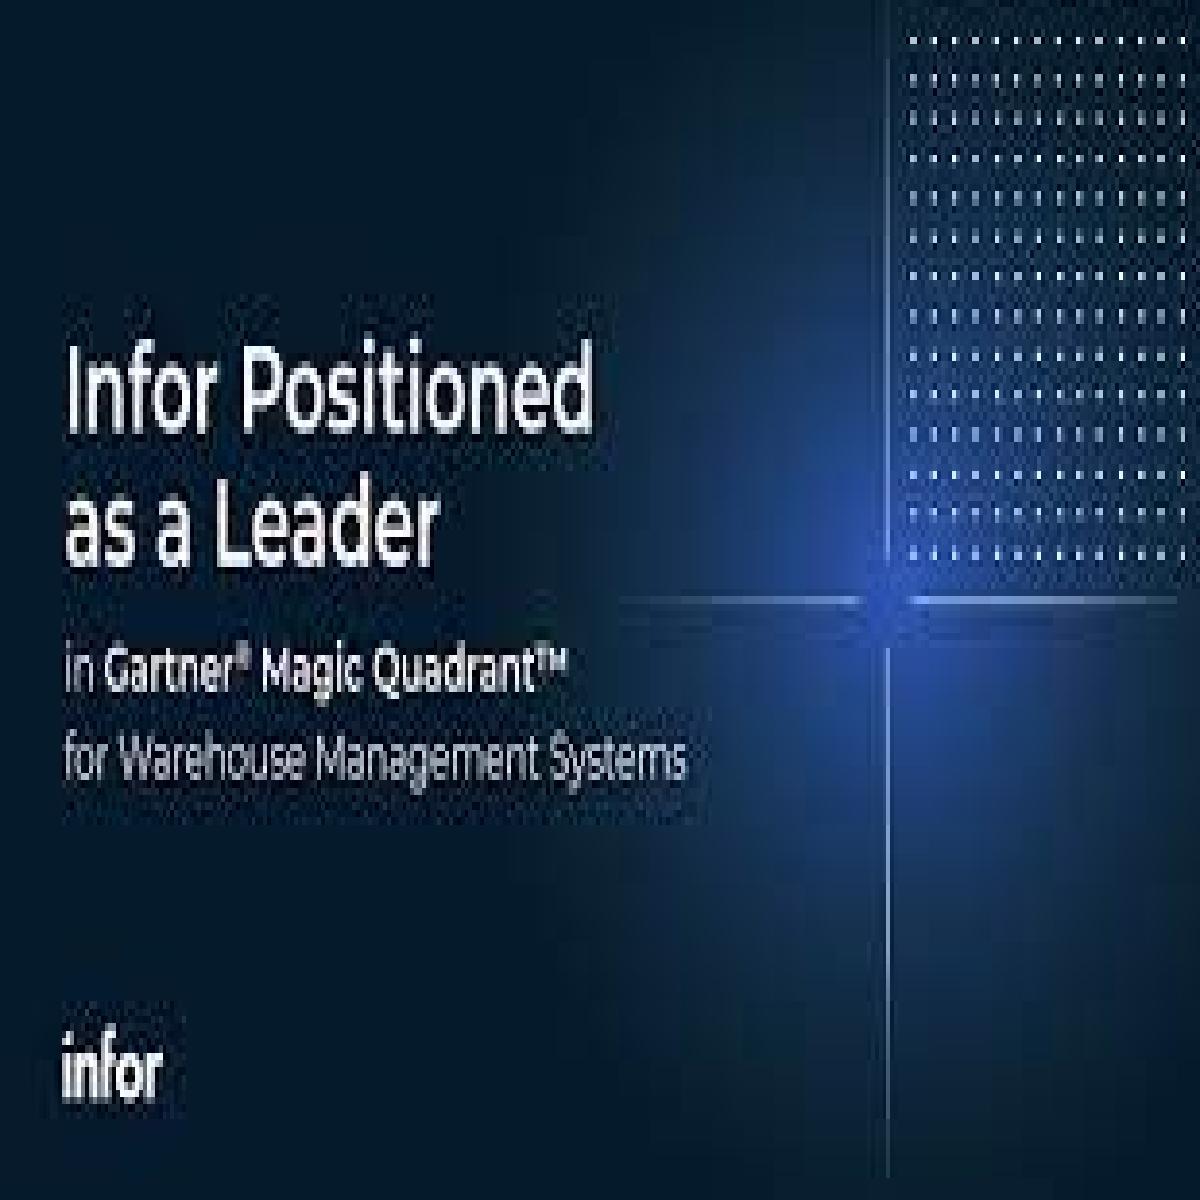 Infor Positioned as a Leader, for Fourth Consecutive Time, in 2022 Gartner Magic Quadrant for Warehouse Management Systems